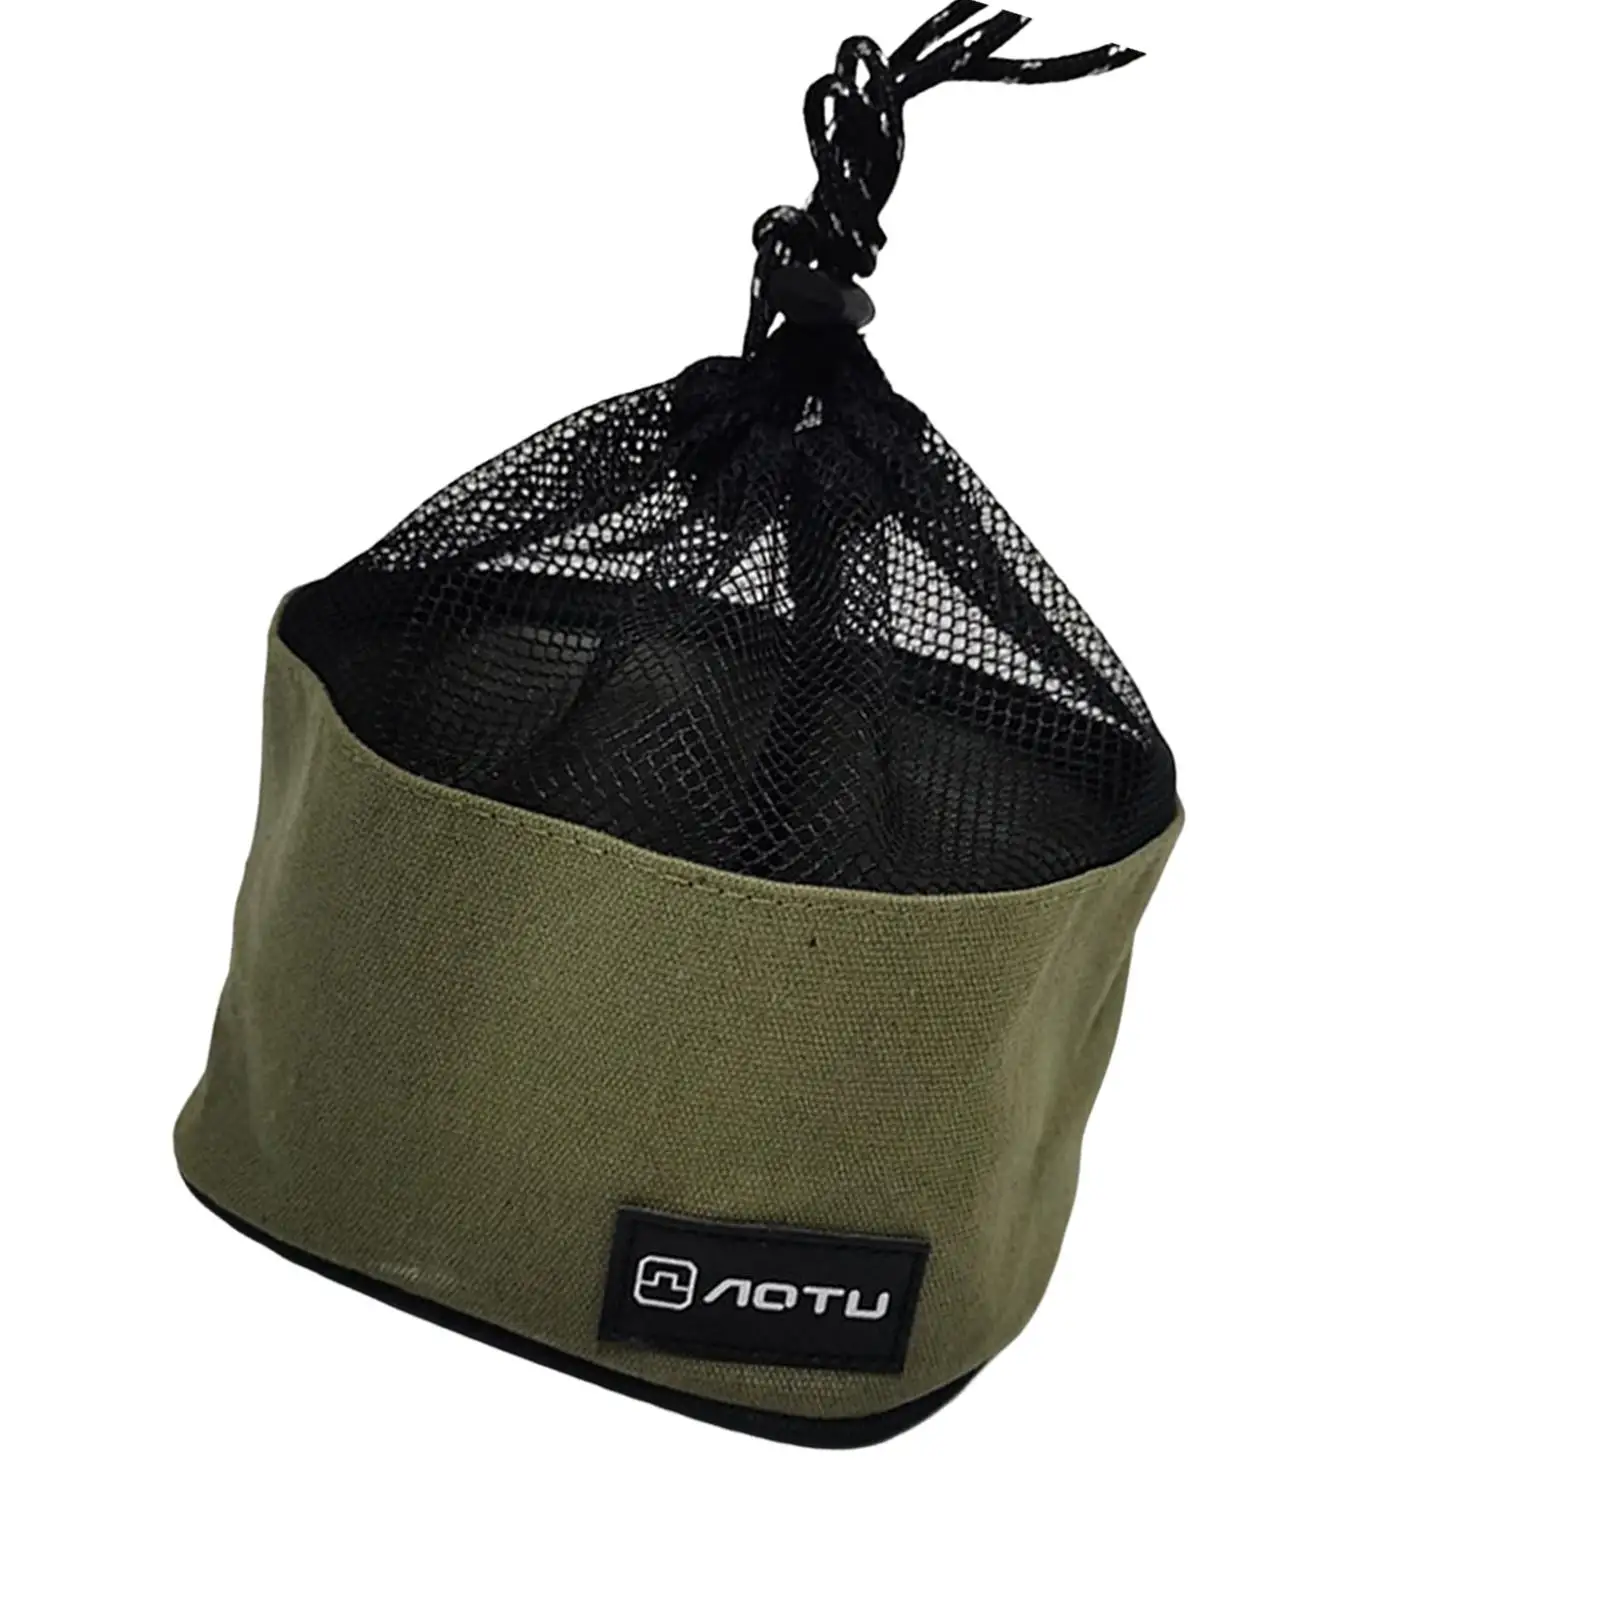 Portable Camping Cooking Utensils Organizer Pouch Drawstring Bag Equipment Tote Carrier for Outdoor BBQ Dinner Hiking Travel